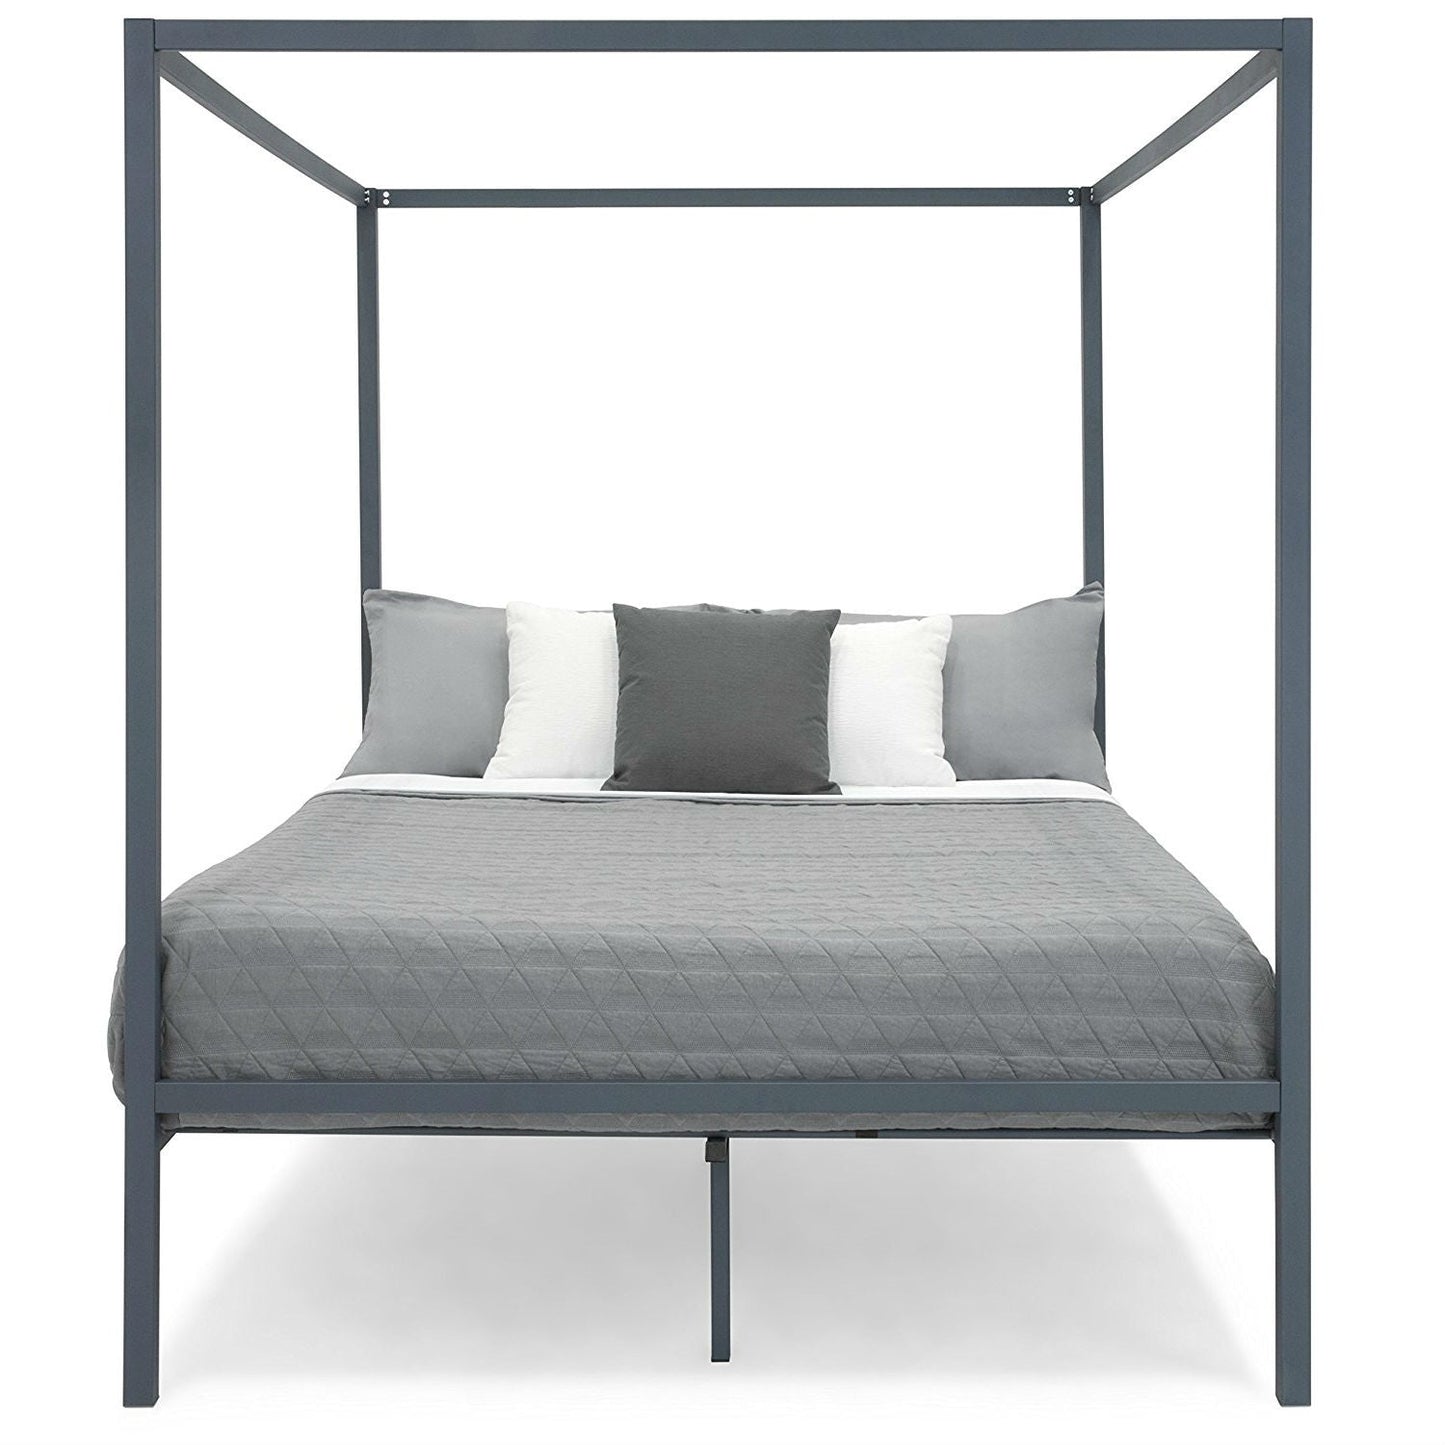 Bedroom > Bed Frames > Canopy Beds - Queen Size Grey Metal Platform Bed Frame With Canopy